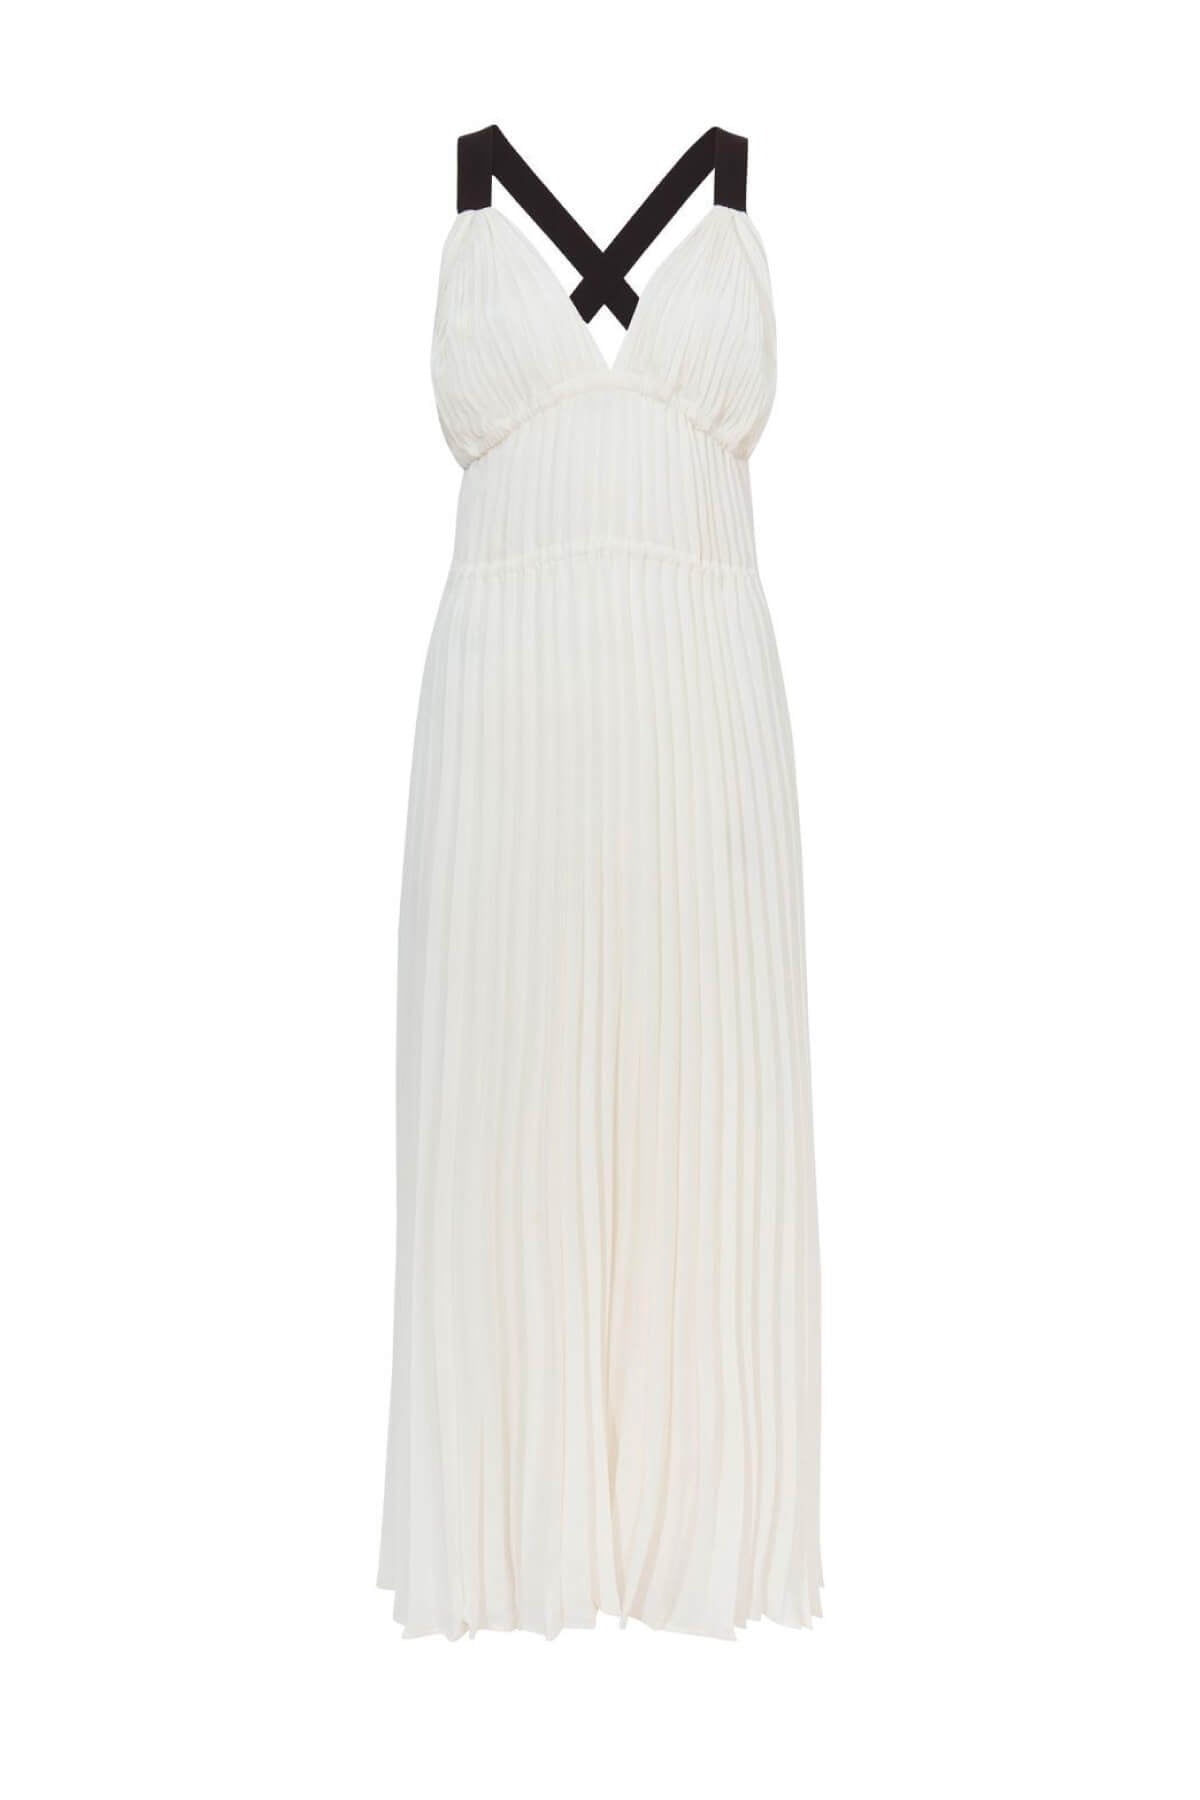 Proenza Schouler White Label Broomstick Pleated Tank Dress - Off White